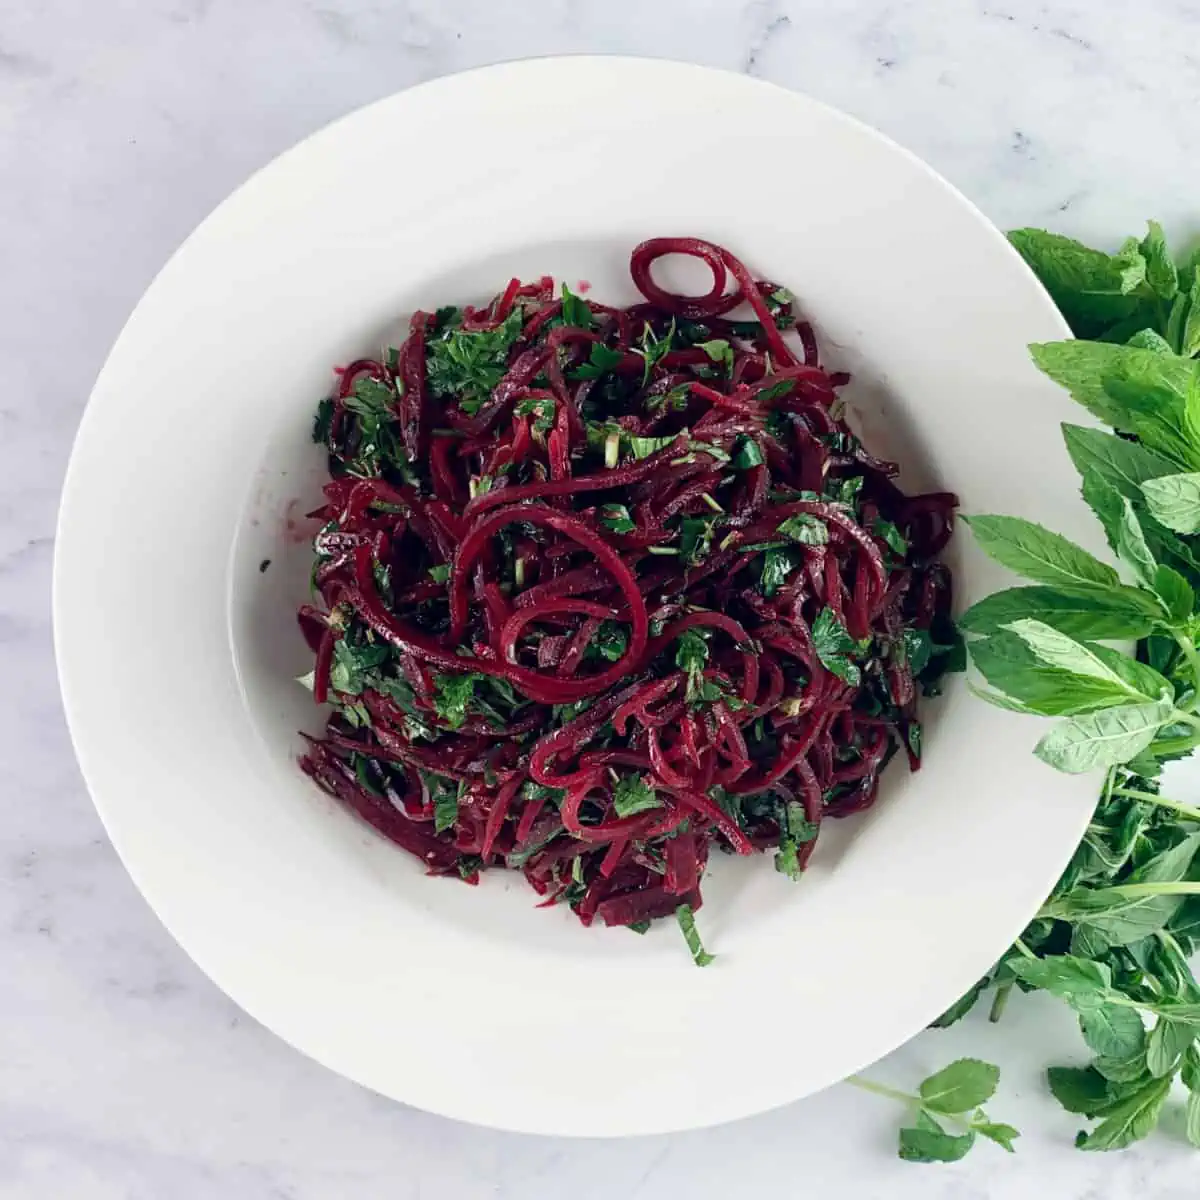 Spiralized beetroot salad in a white bowl with mint on the side.